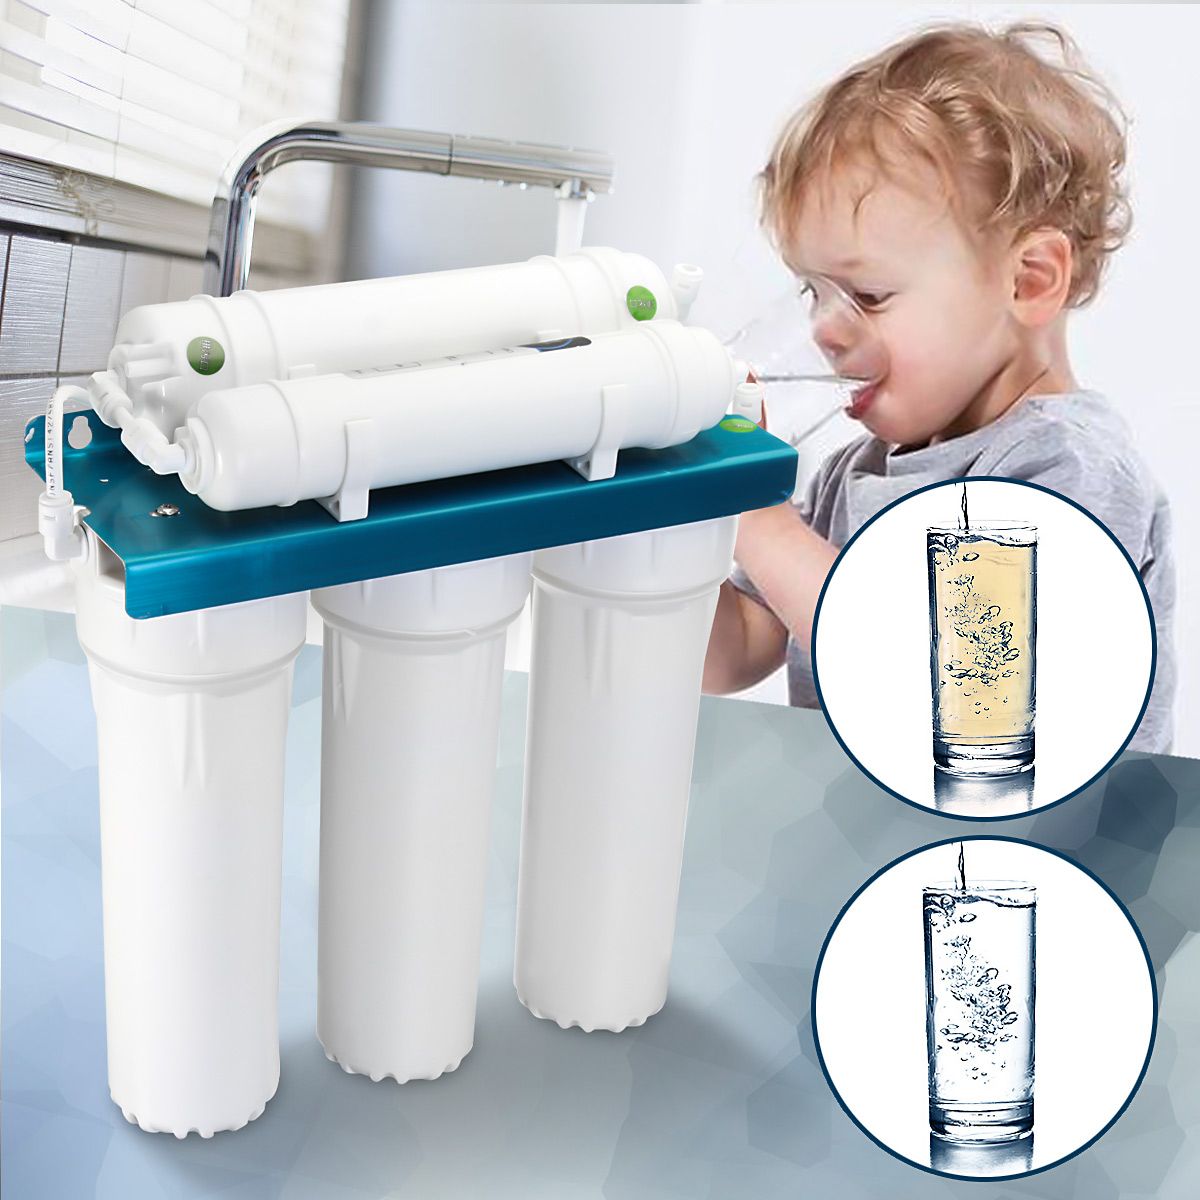 5-Stages-Water-Purifier-Reverse-Osmosis-Filtration-Drinking-Water-Filter-System-Ultra-Safe-1364423